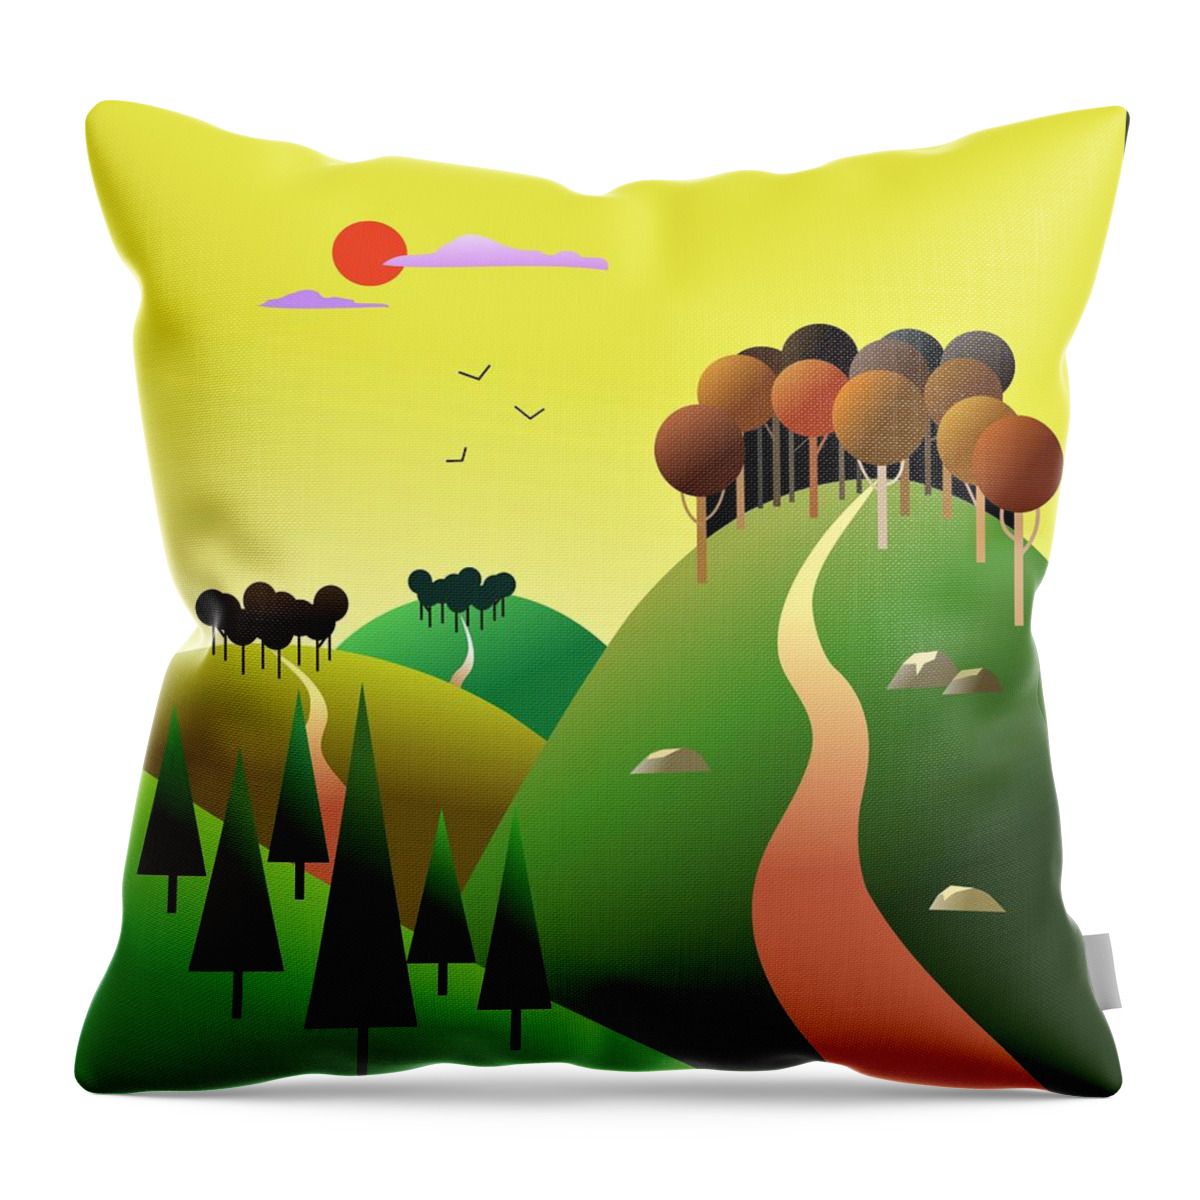 Countryside Throw Pillow featuring the digital art An English Landscape by Fatline Graphic Art